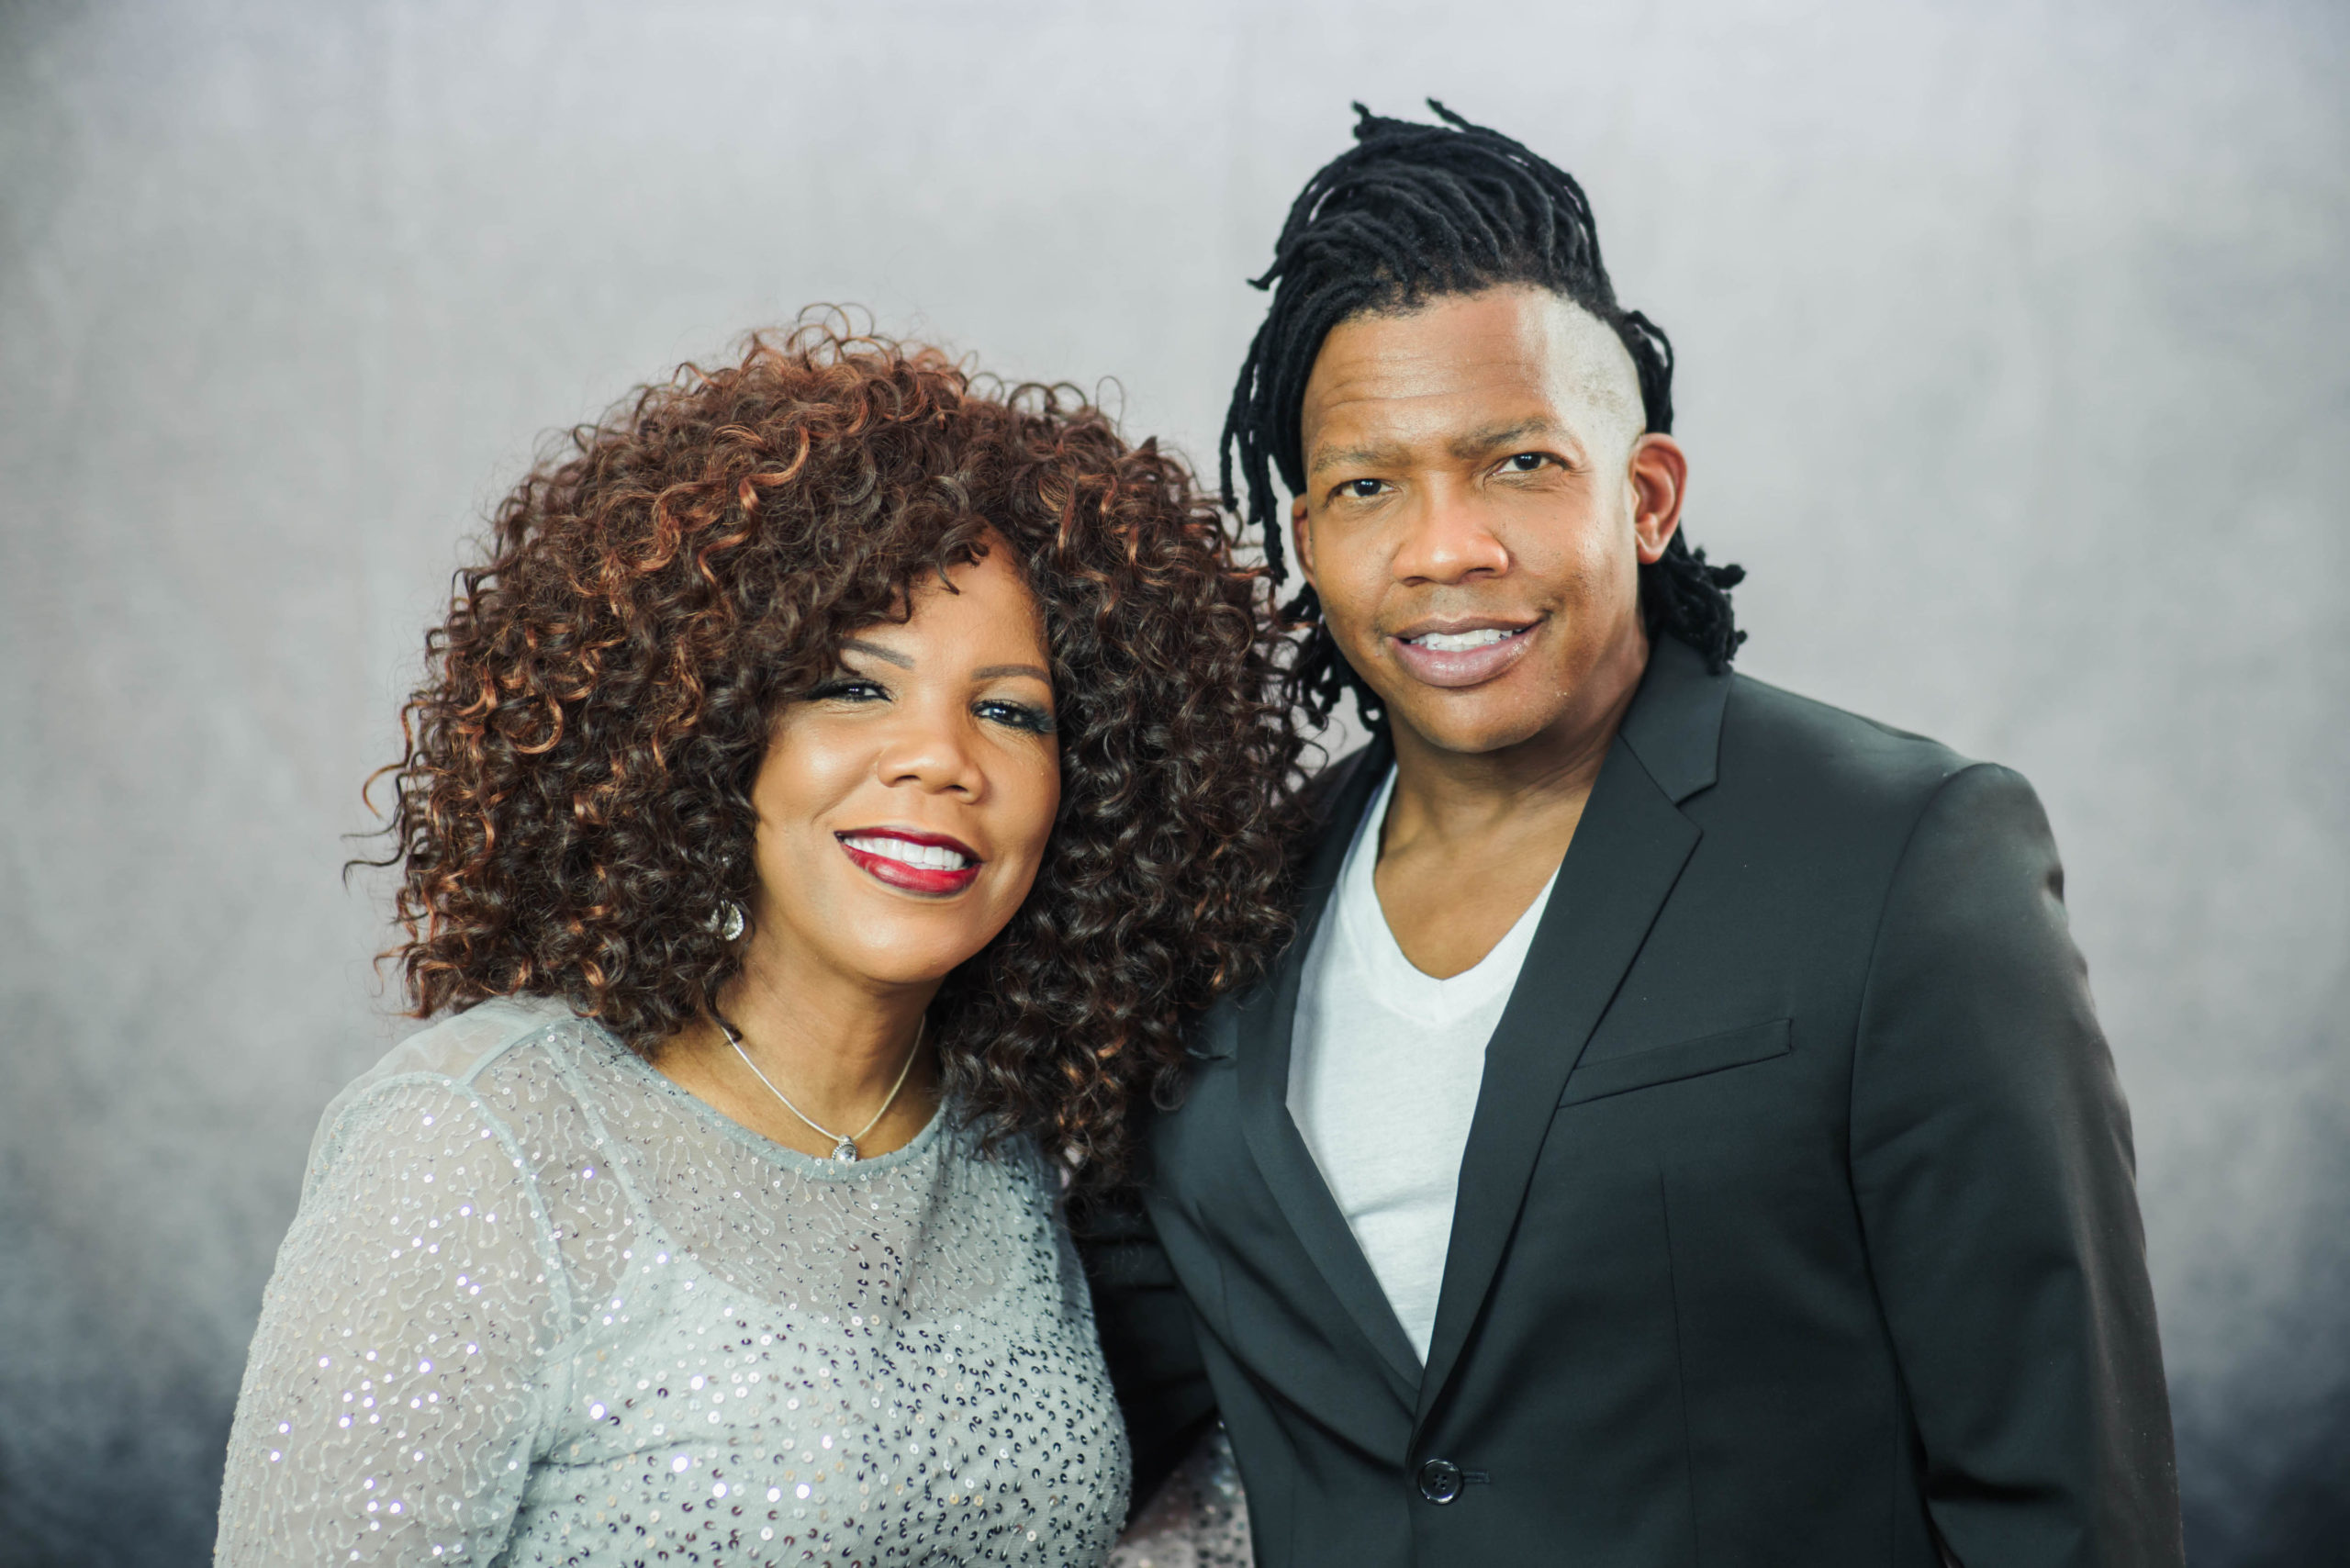 LYNDA RANDLE AND MICHAEL TAIT SPREAD VIRTUAL YULETIDE CHEER WITH â€˜TOGETHER FOR CHRISTMAS IN JULYâ€™